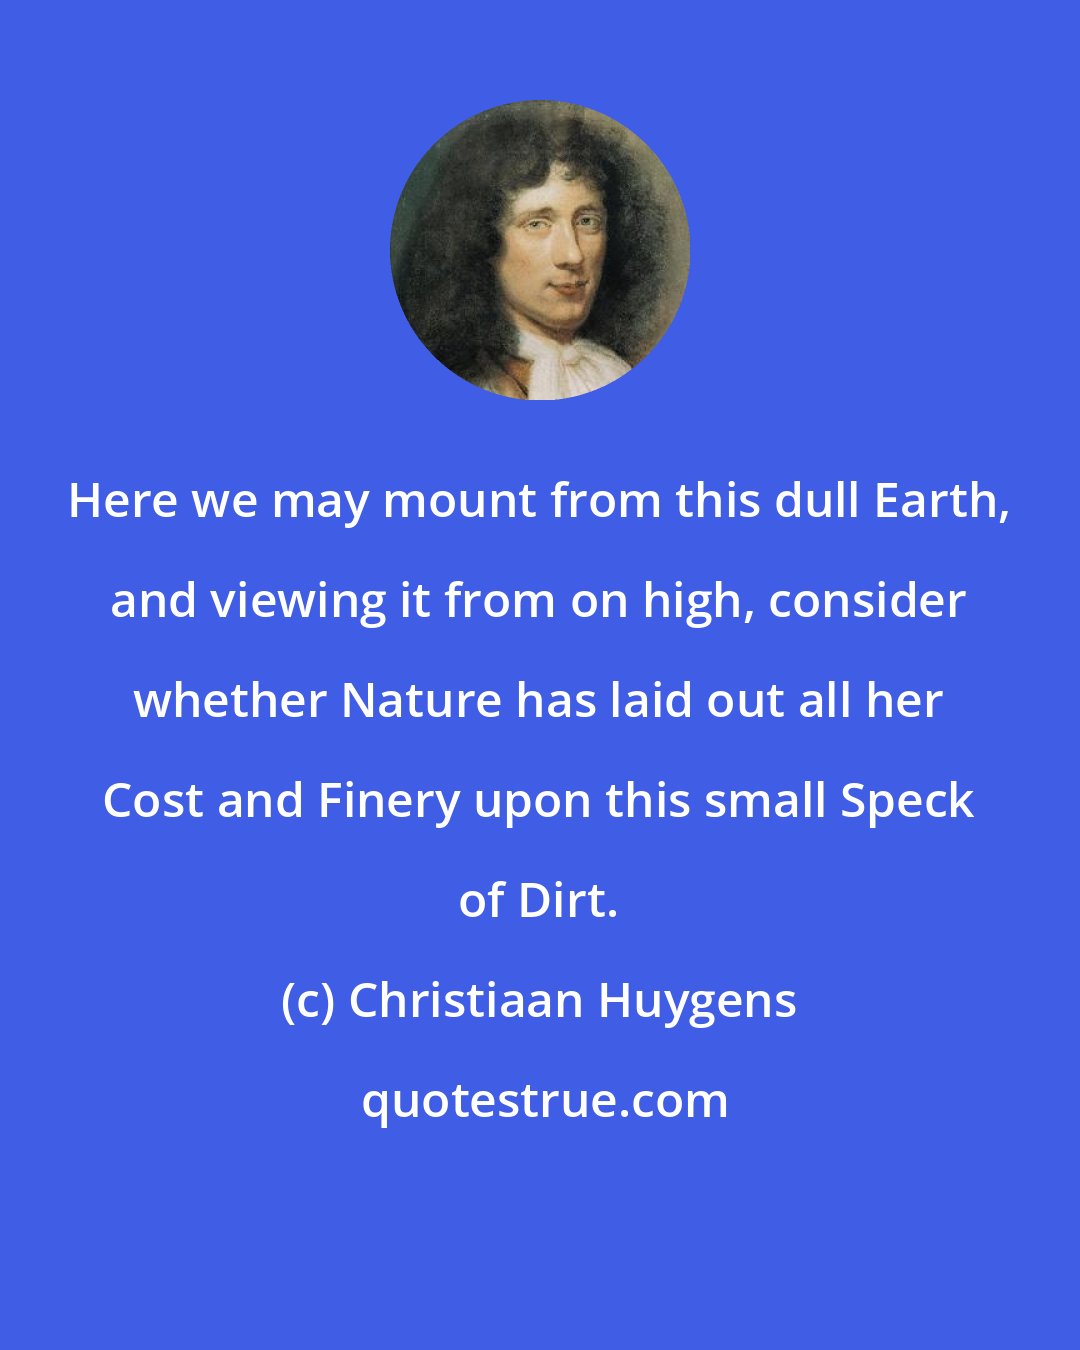 Christiaan Huygens: Here we may mount from this dull Earth, and viewing it from on high, consider whether Nature has laid out all her Cost and Finery upon this small Speck of Dirt.